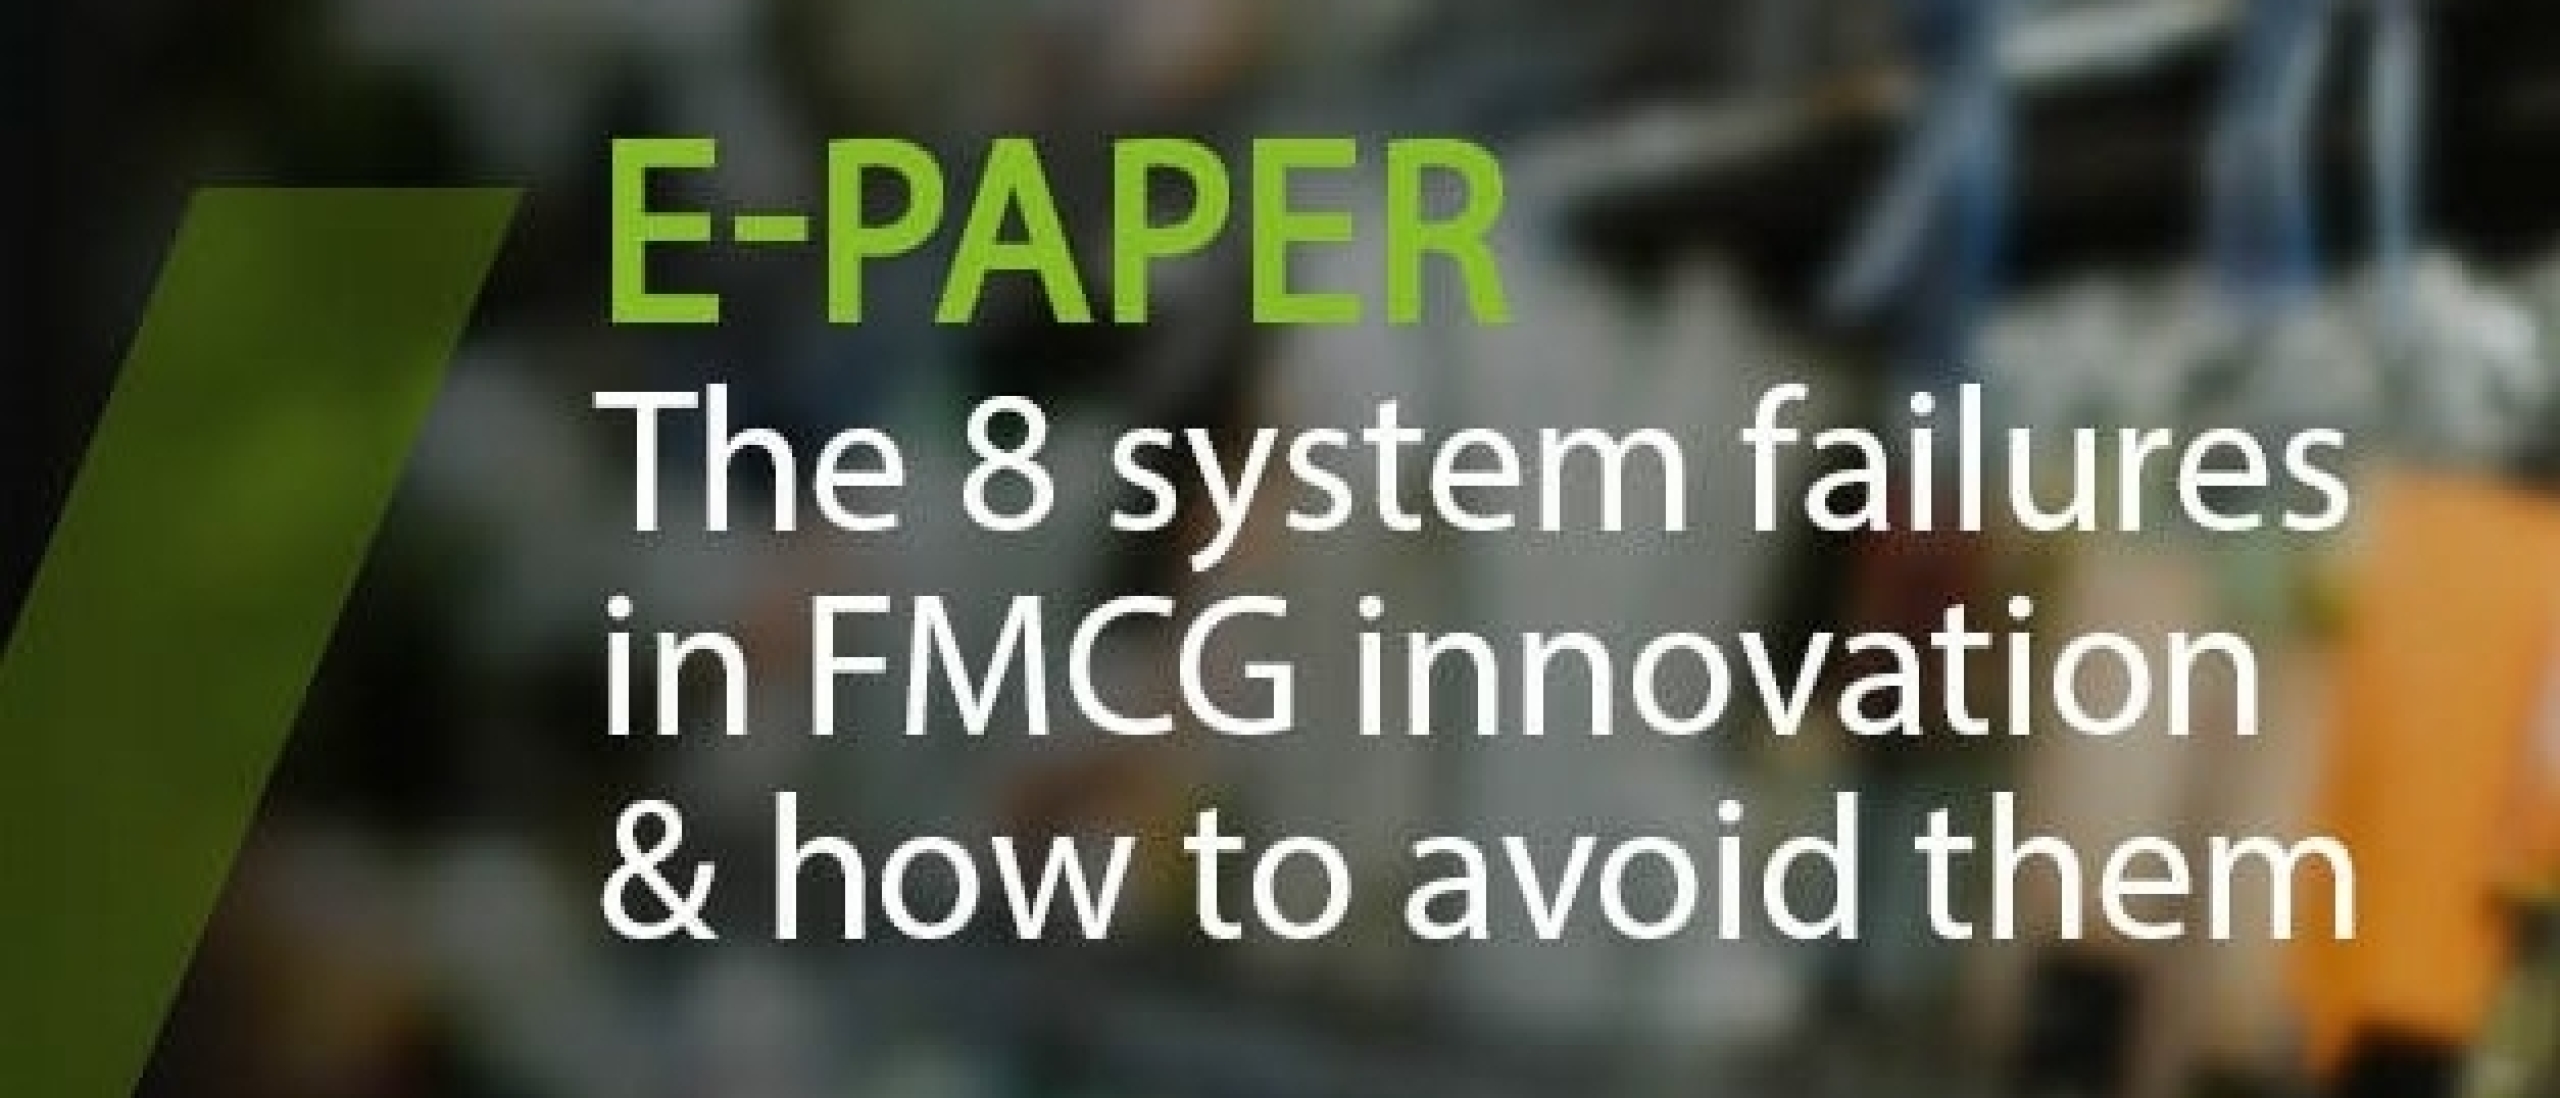 E-paper: The 8 system failures in FMCG innovation